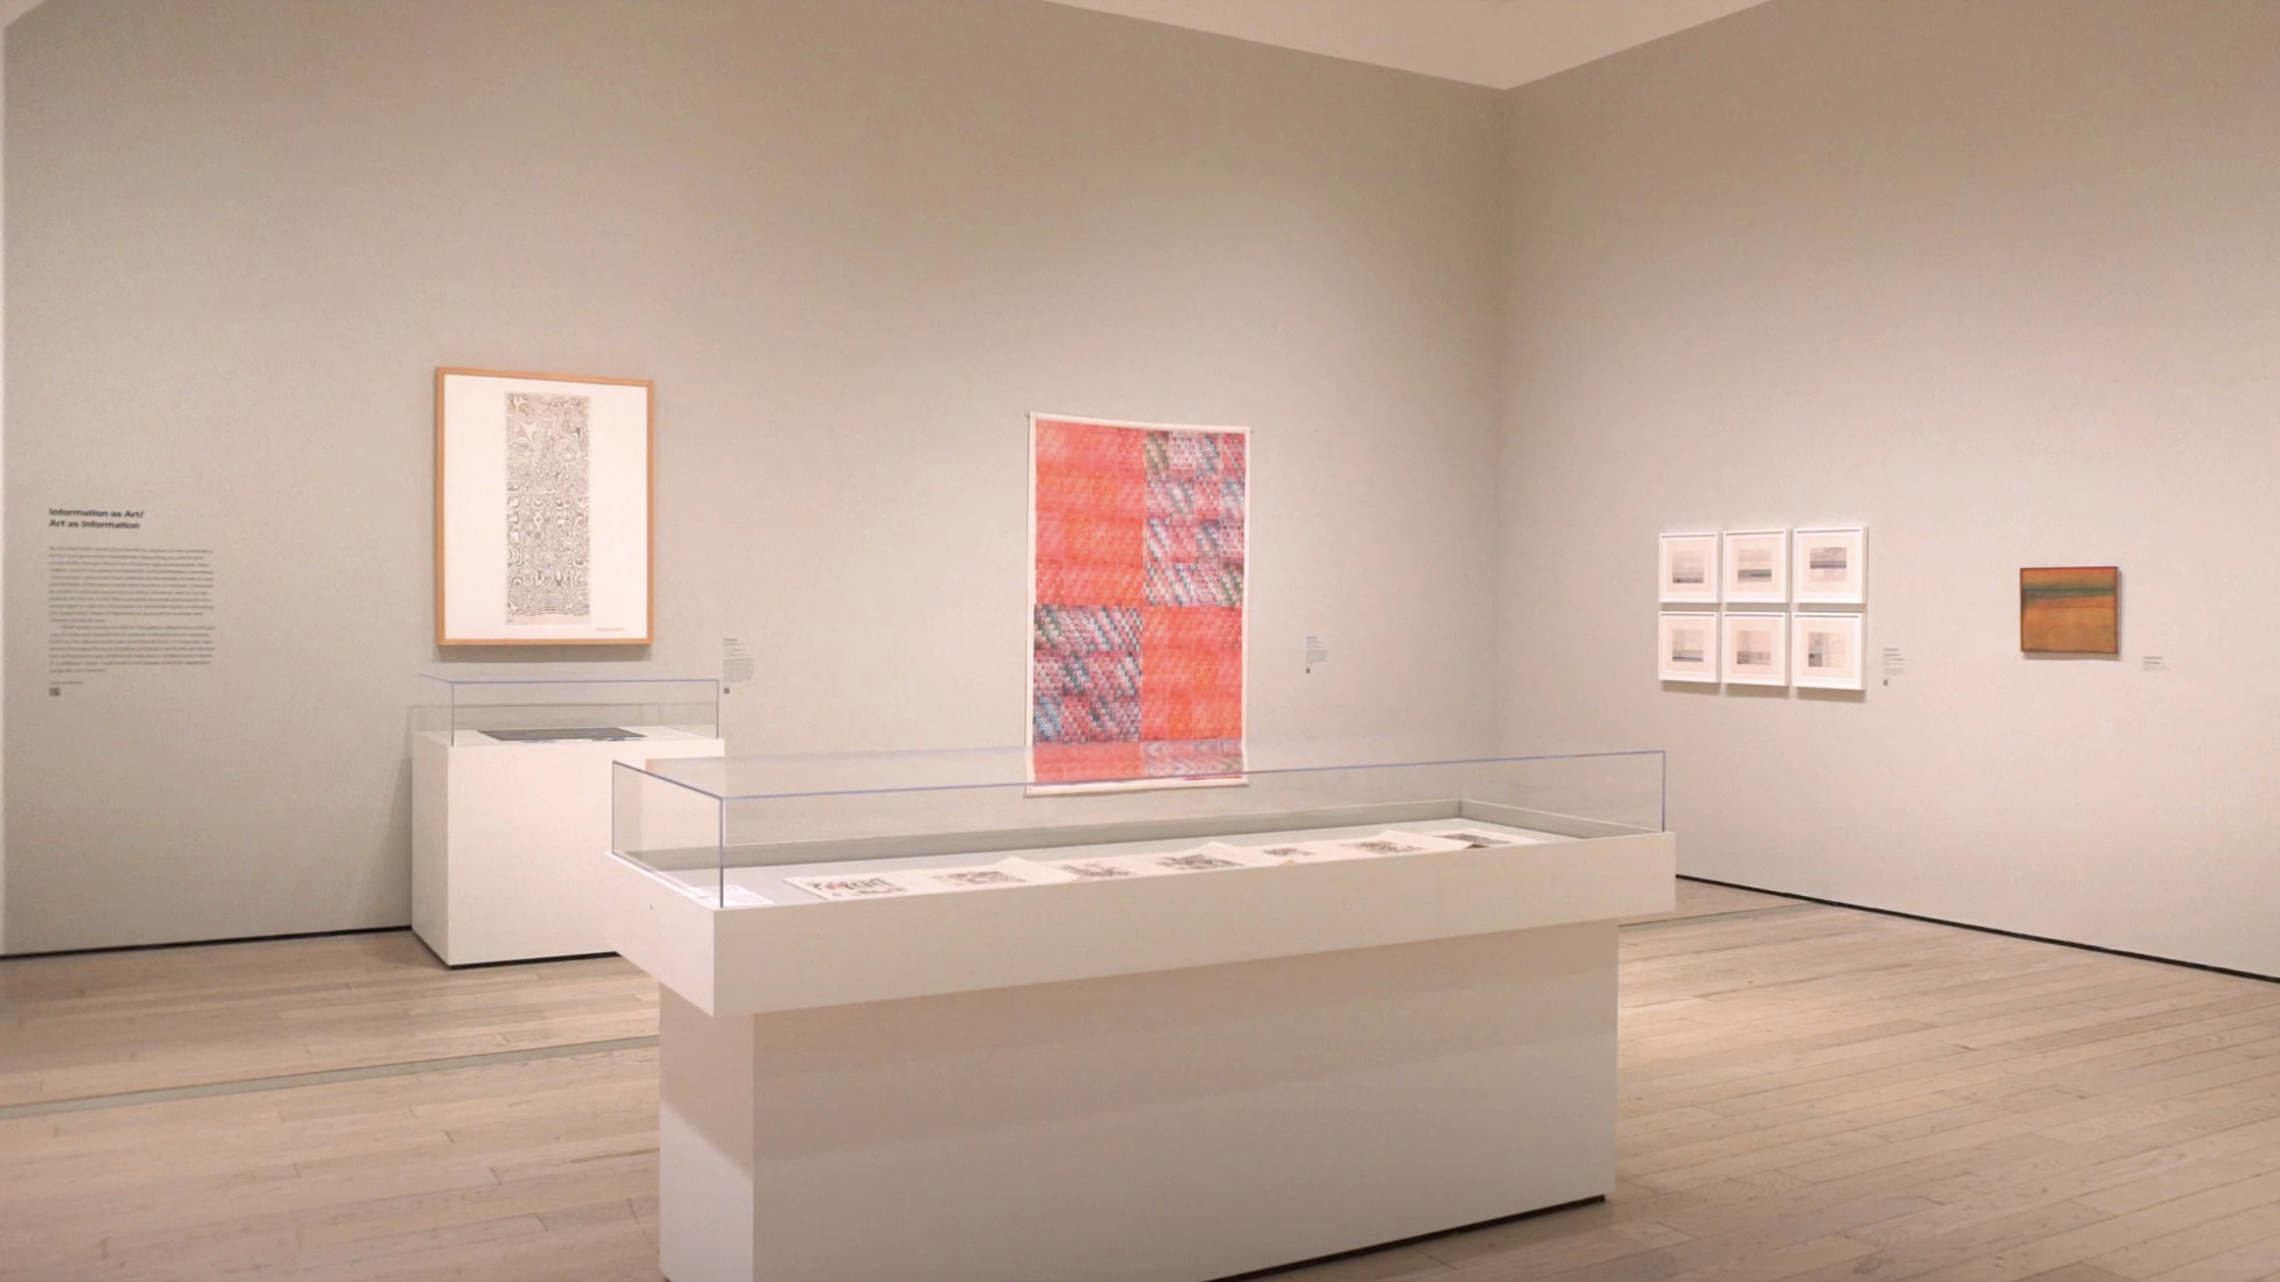 image of glass case in museum gallery space with art on walls